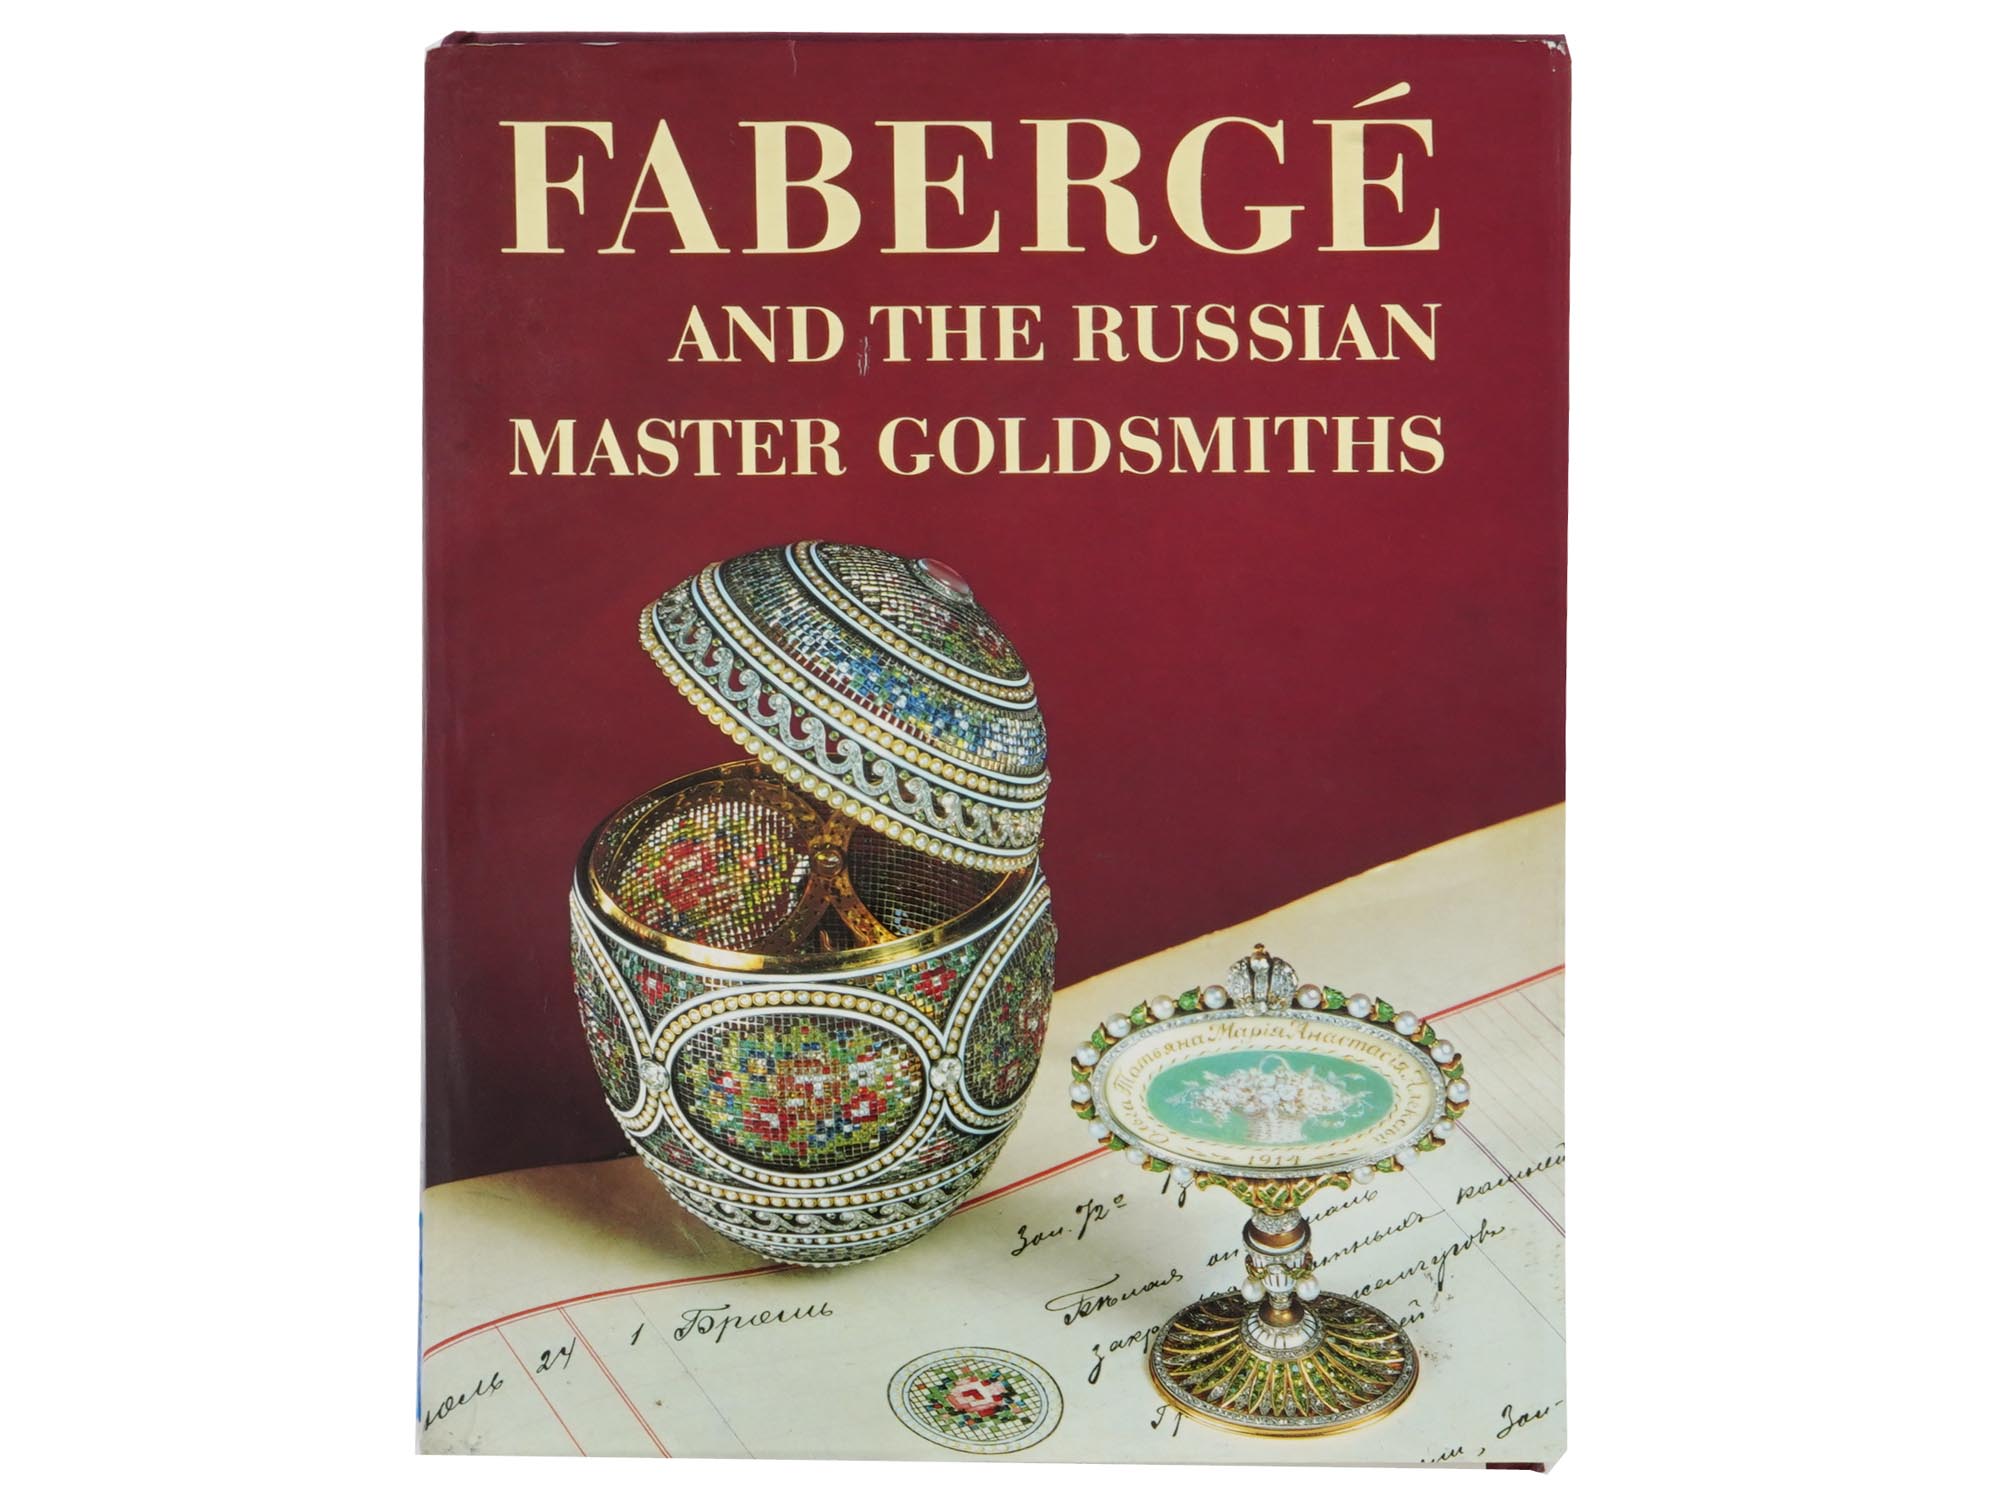 FABERGE AND THE RUSSIAN MASTER GOLDSMITHS ALBUM PIC-0